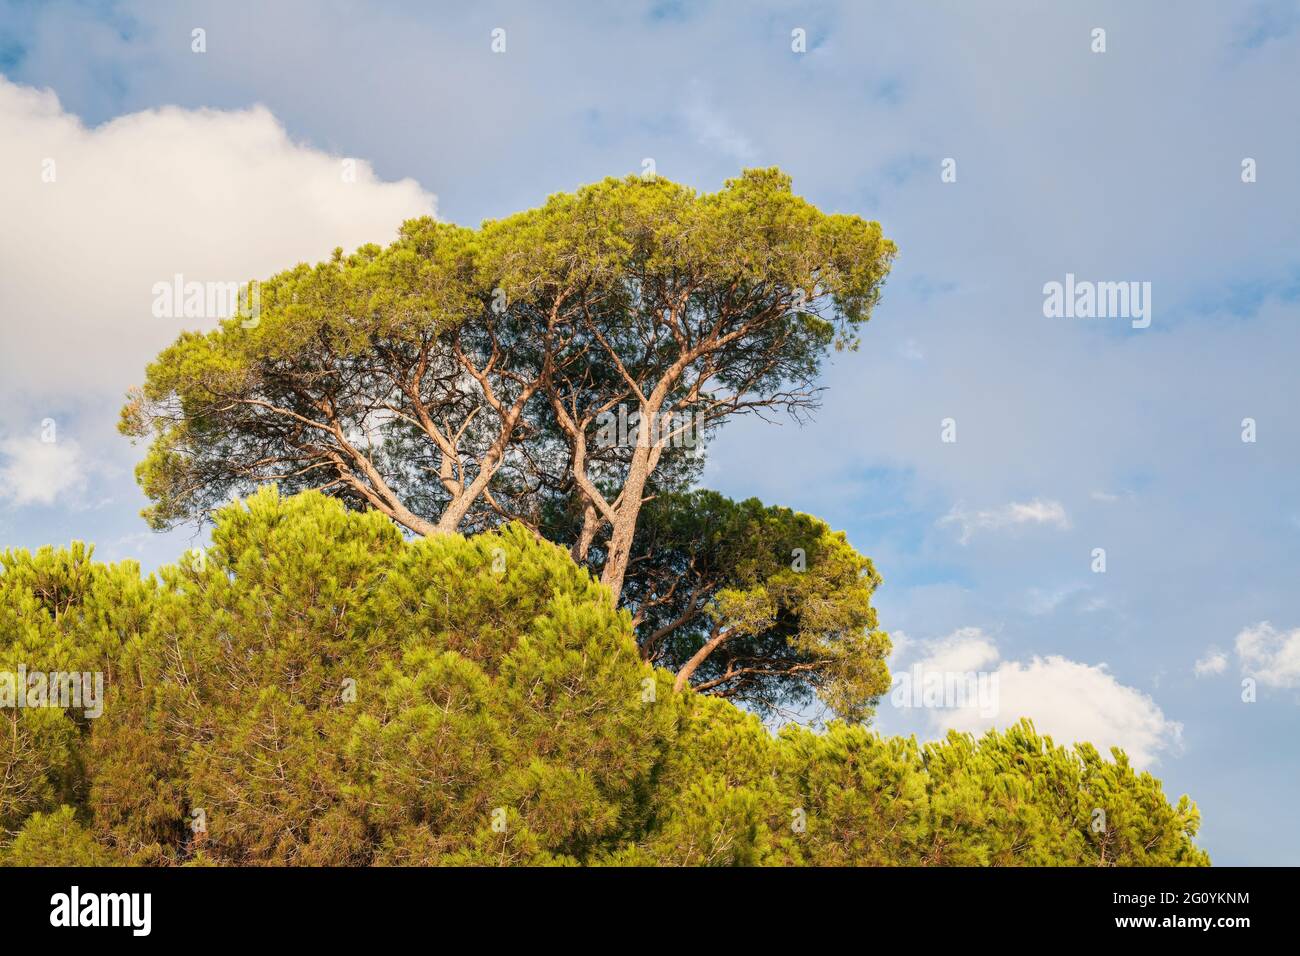 Stone pine in the forest in a bright day, south coast of Turkey in Mediterranean. Pinus pinea also know as umbrella pine. Stock Photo